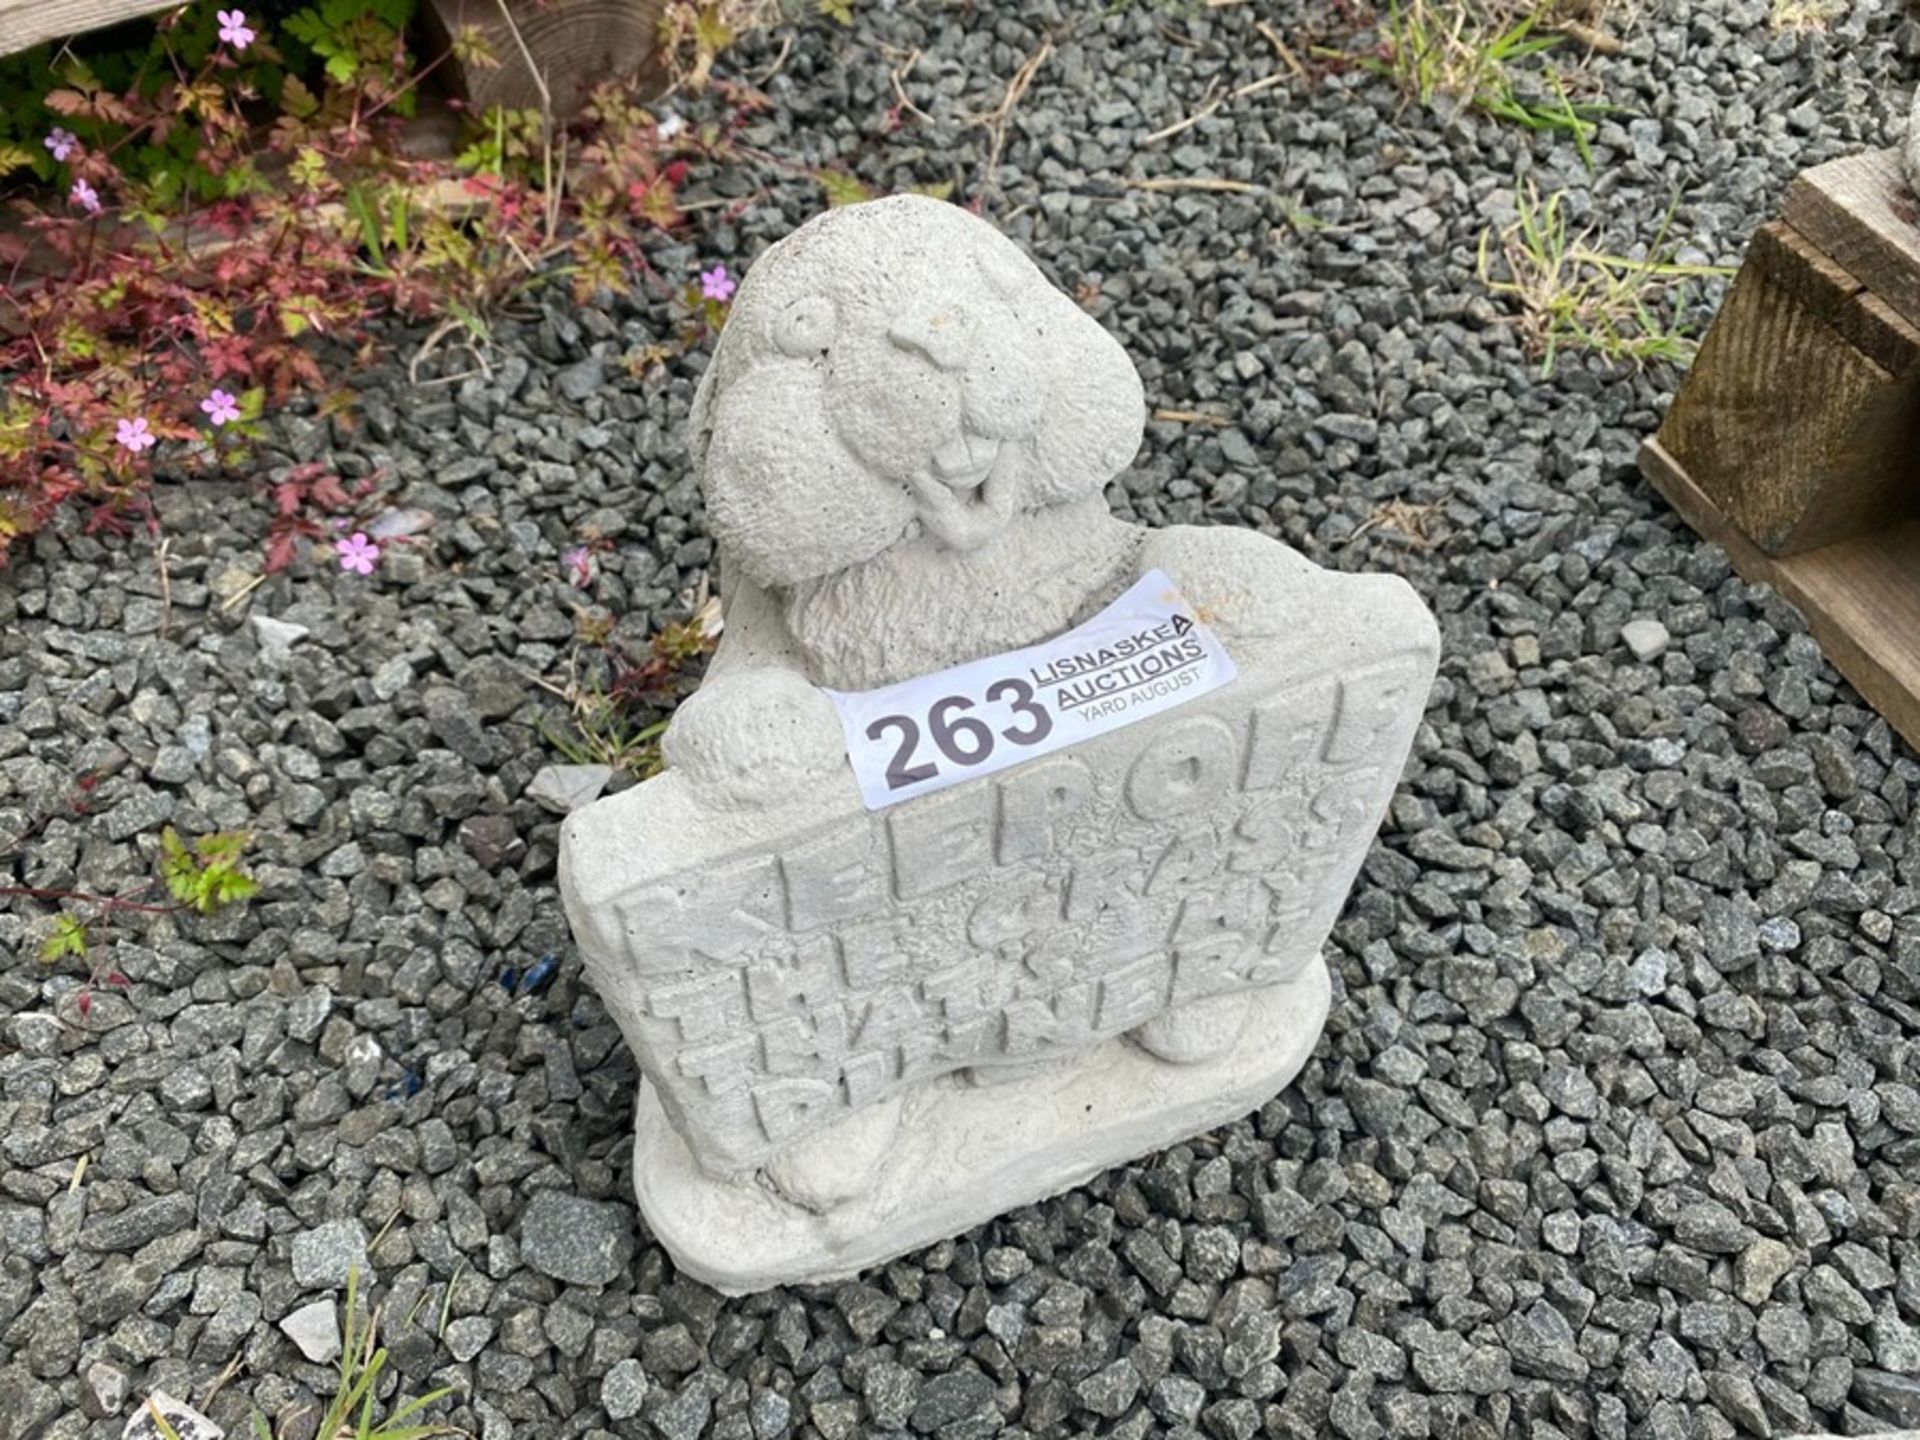 KEEP OUT GARDEN STONE ORNAMENT